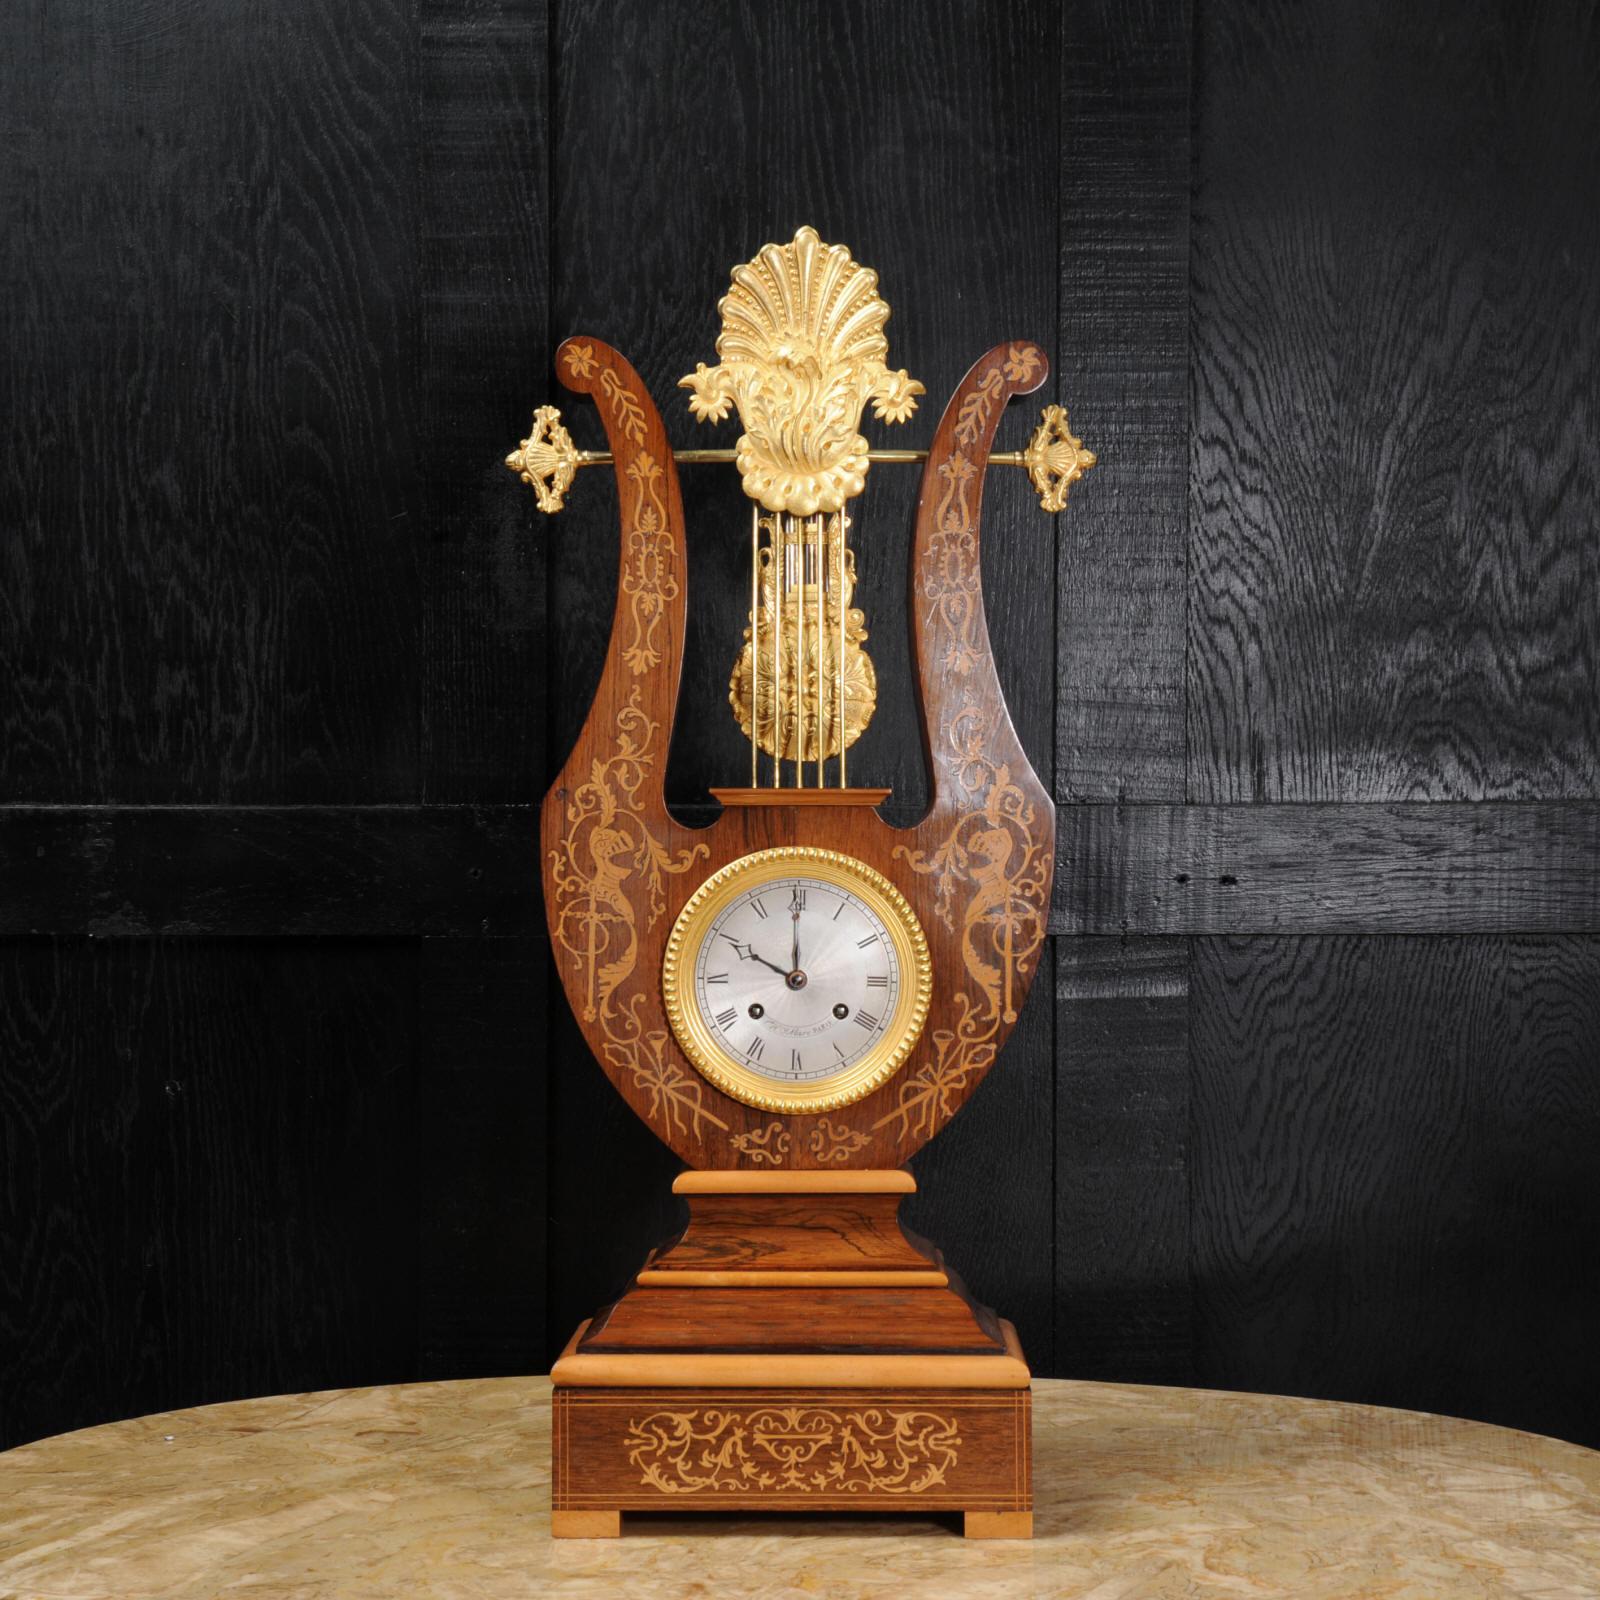 Rosewood and Ormolu Lyre clock with mystery pendulum
French, circa 1850 

Excellent condition, fully overhauled.

An early and stunning clock by Henri Marc of Paris. It is beautifully made in rosewood veneer with delicate marquetry inlay and